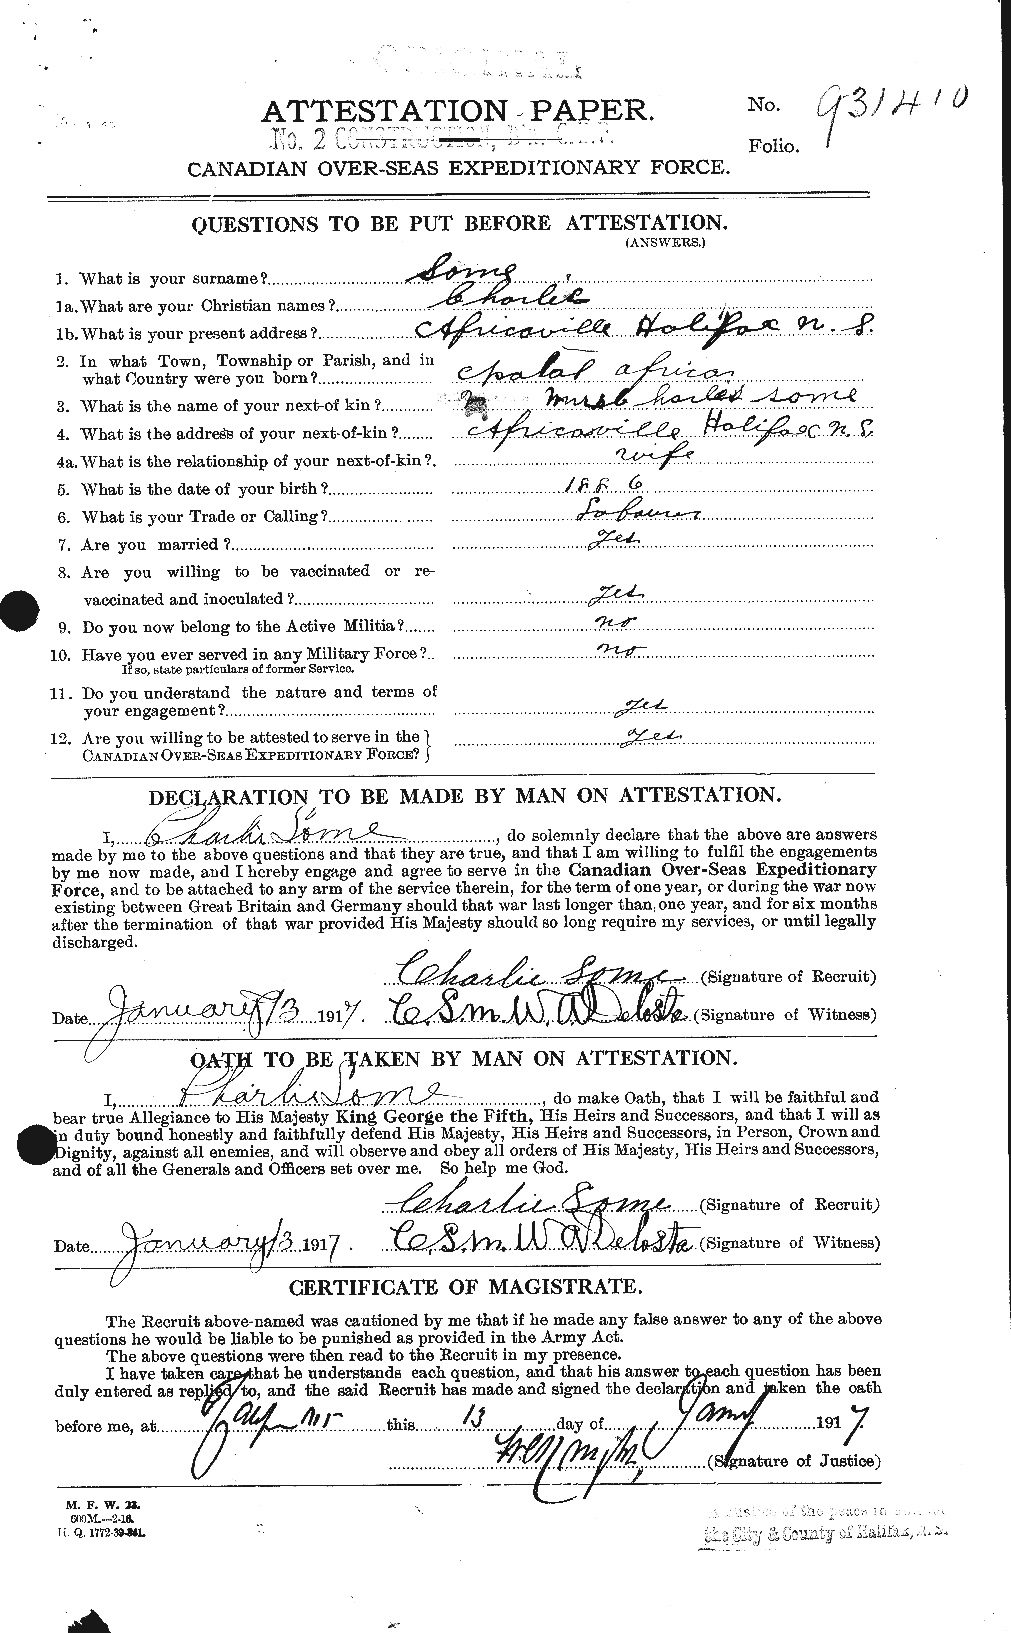 Personnel Records of the First World War - CEF 107188a